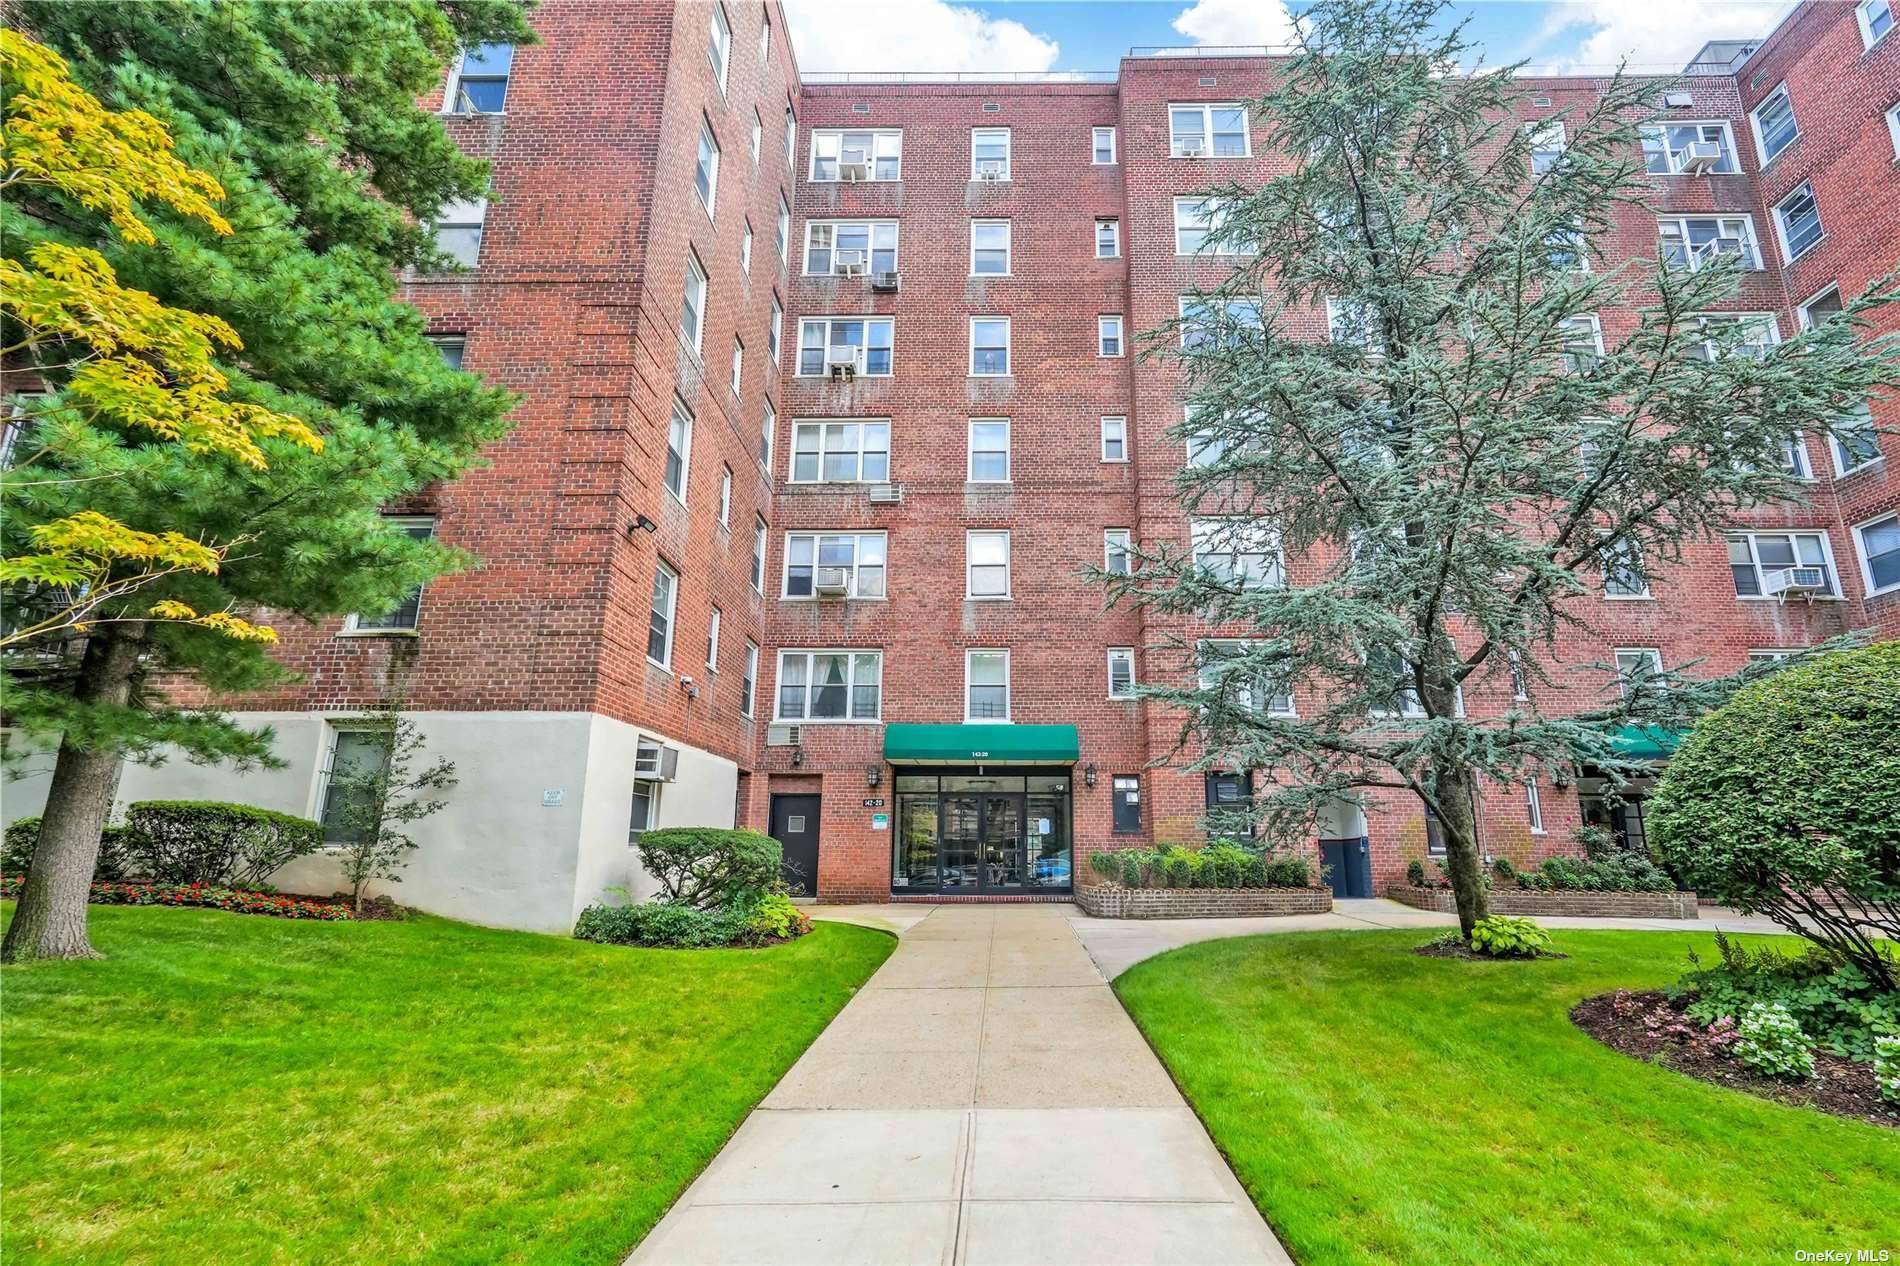 Welcome to this inviting 2 bedroom, 1 bathroom coop corner unit situated on the 1st floor above the lobby.